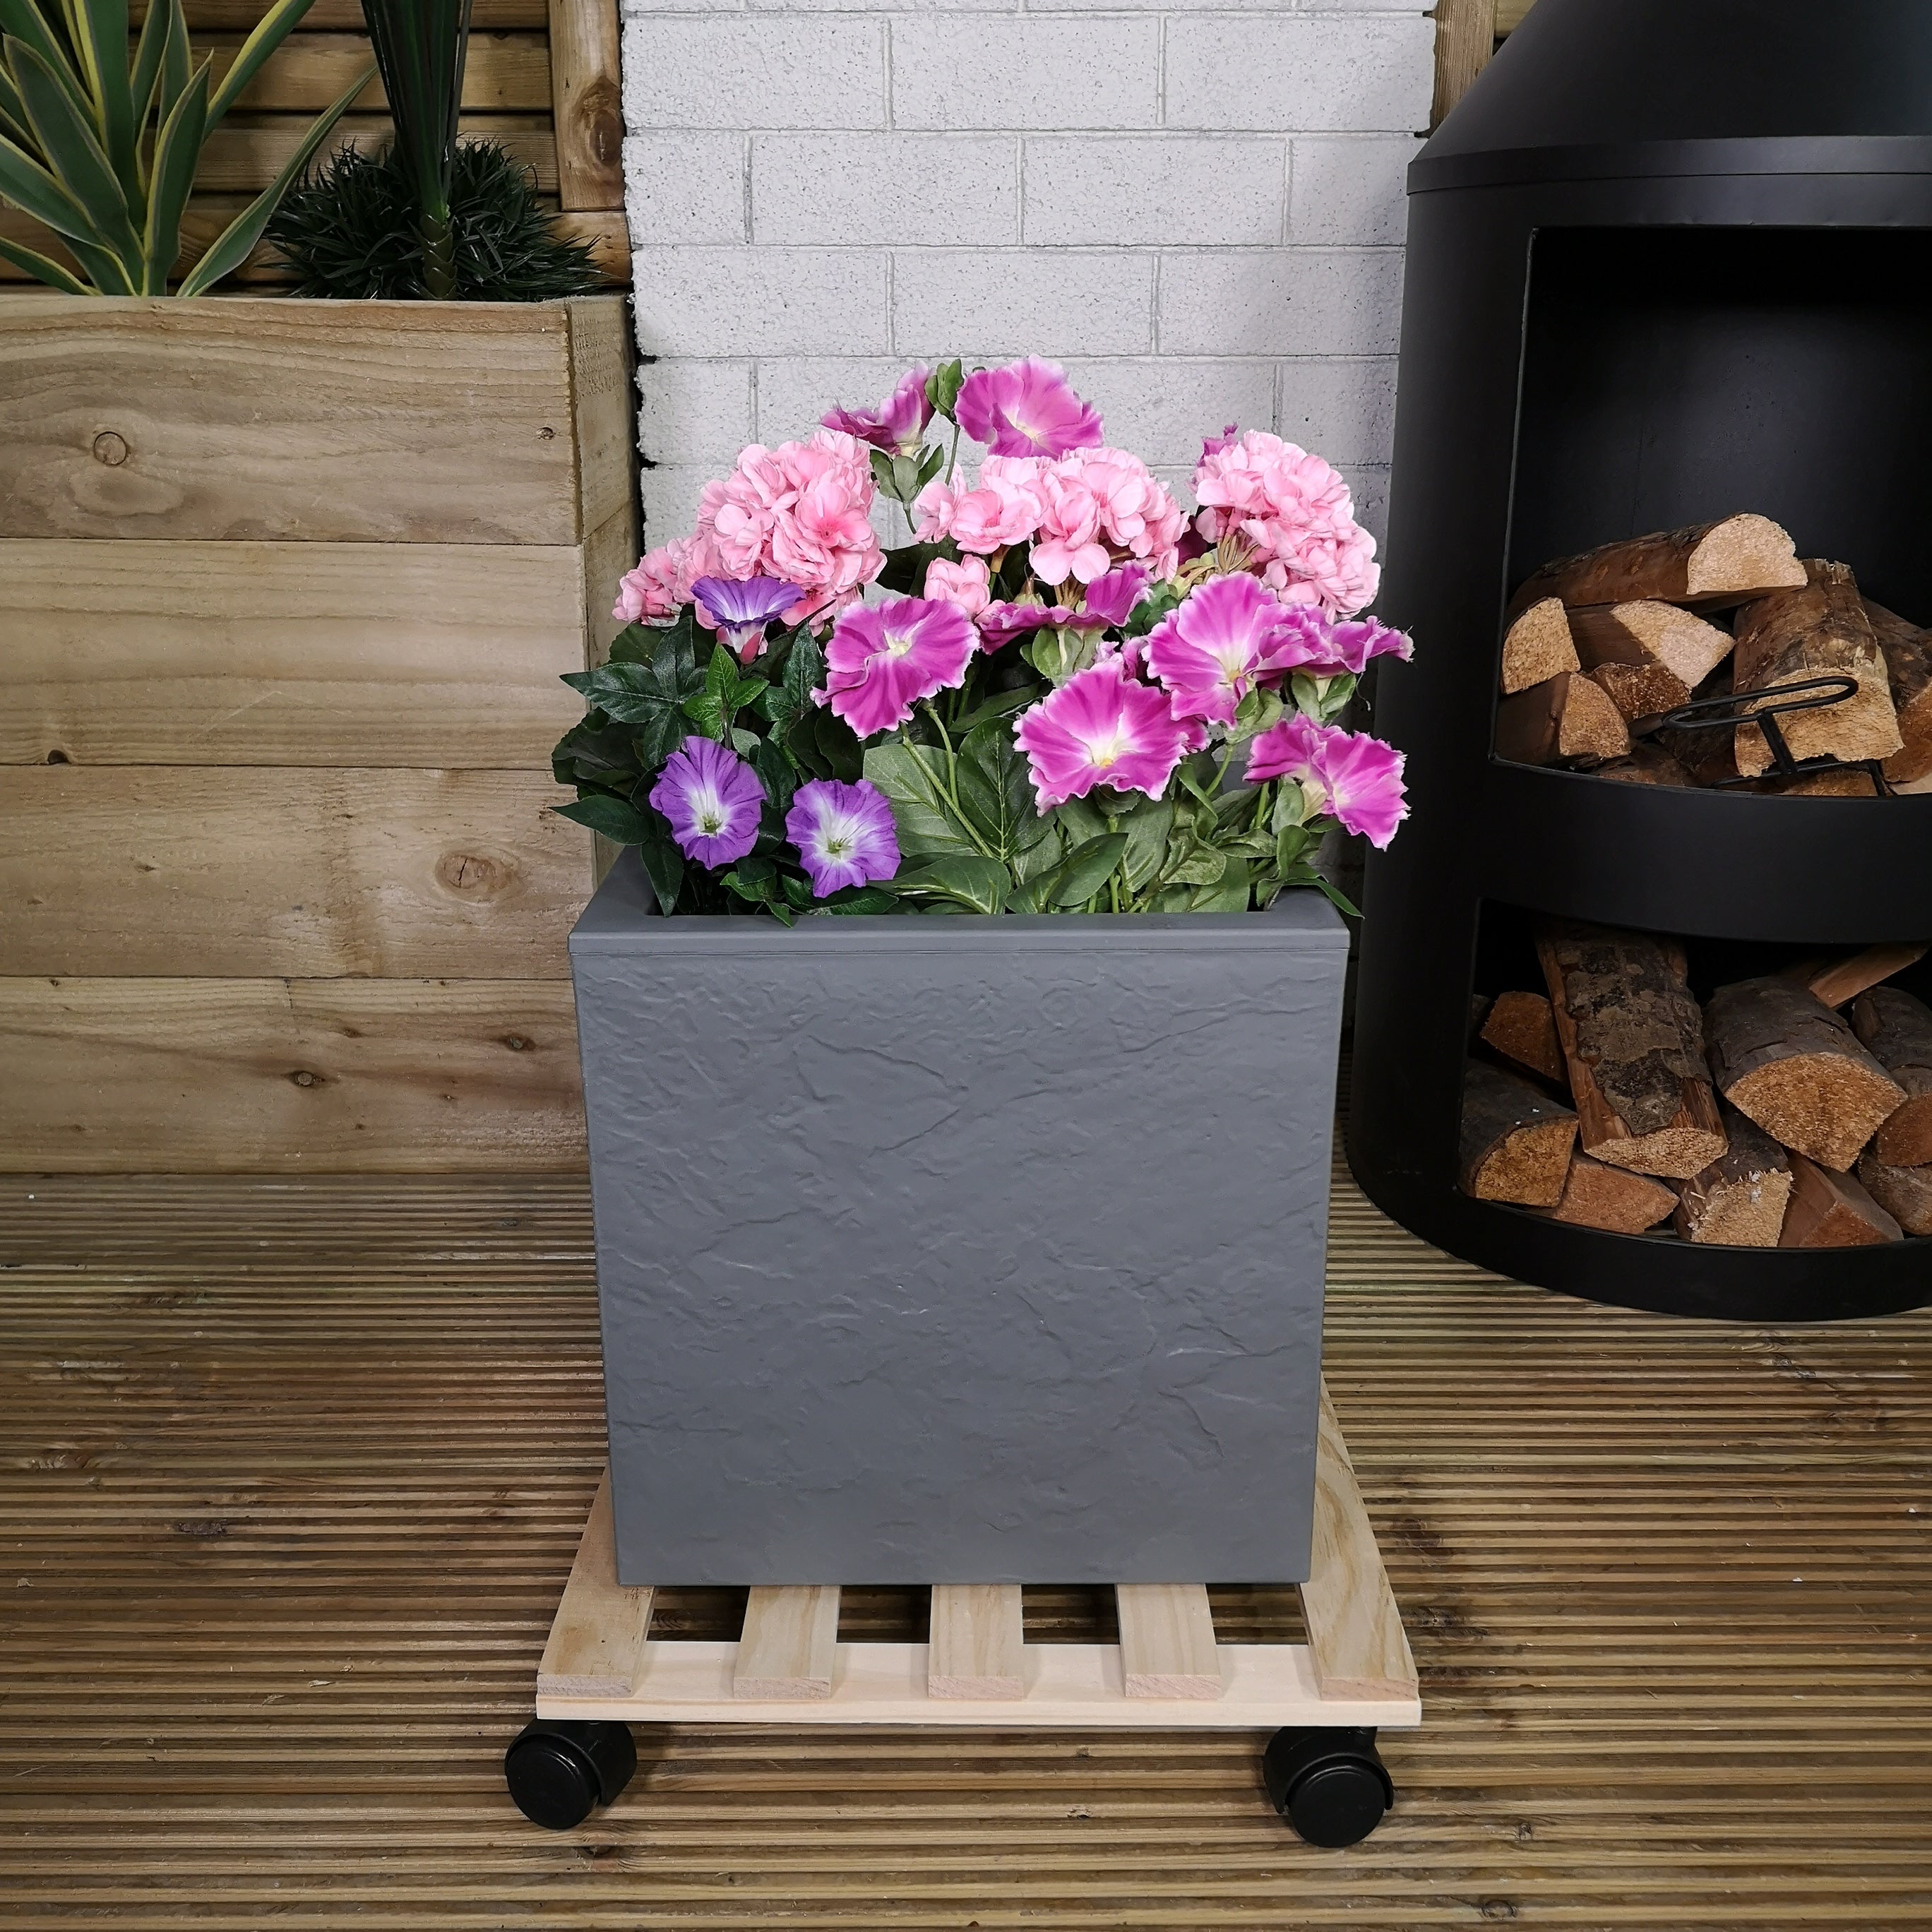 35cm Square Wooden Garden Plant Pot Flower Trolley Stand On Wheels